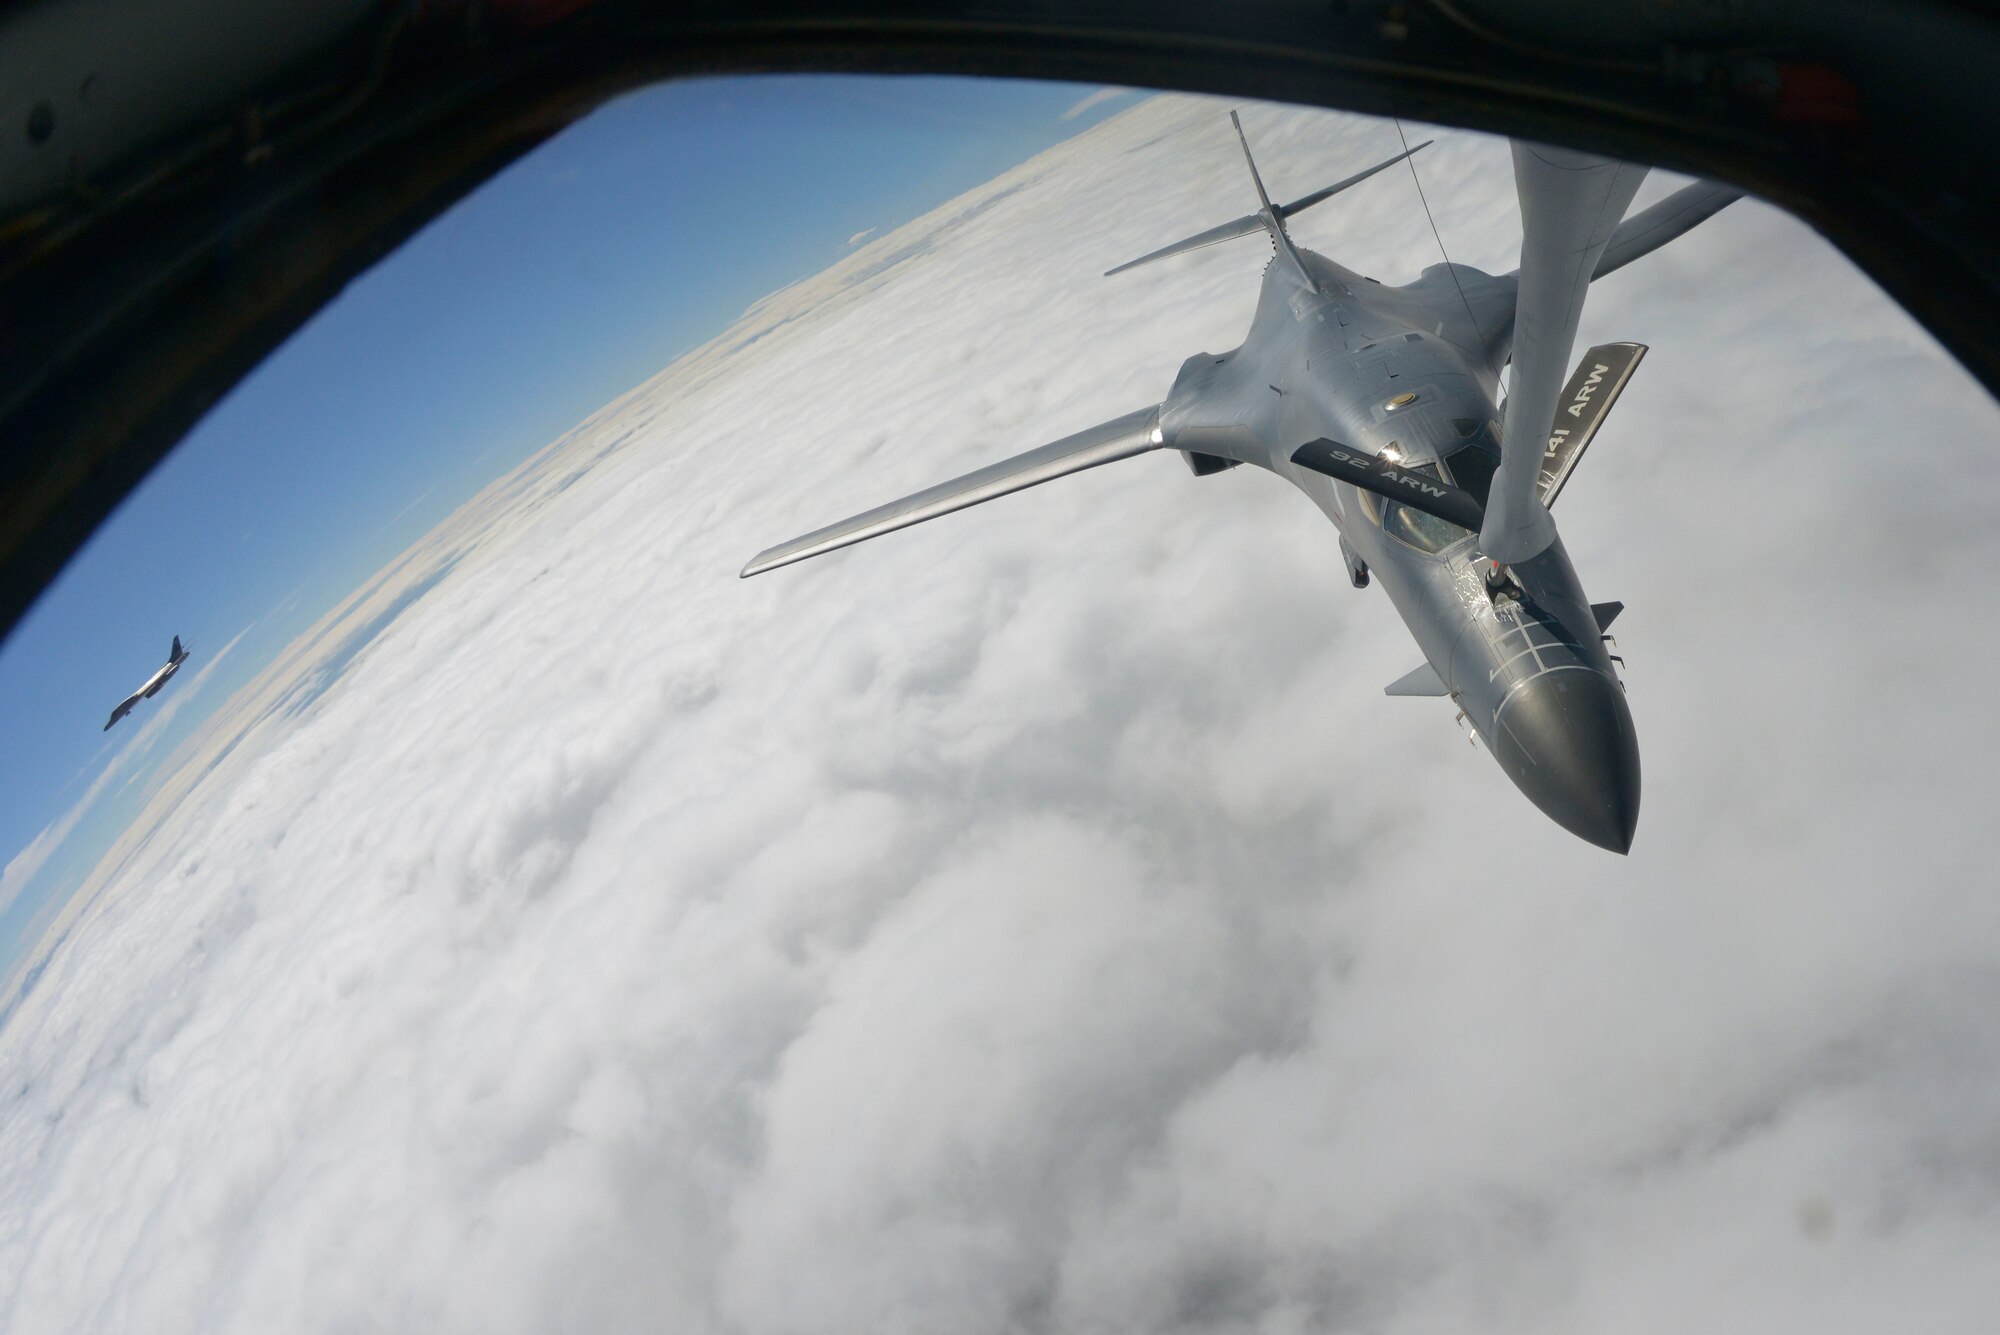 A B-1B Lancer, receives fuel from a KC-135 Stratotanker assigned to Fairchild Air Force Base over South Dakota, Sept. 23, 2014. During the flight, the crew performed training procedures with two B-1B's. The B-1B's are assigned to Ellsworth Air Force Base, South Dakota. (U.S. Air Force photo by Airman 1st Class Janelle Patiño/Released)